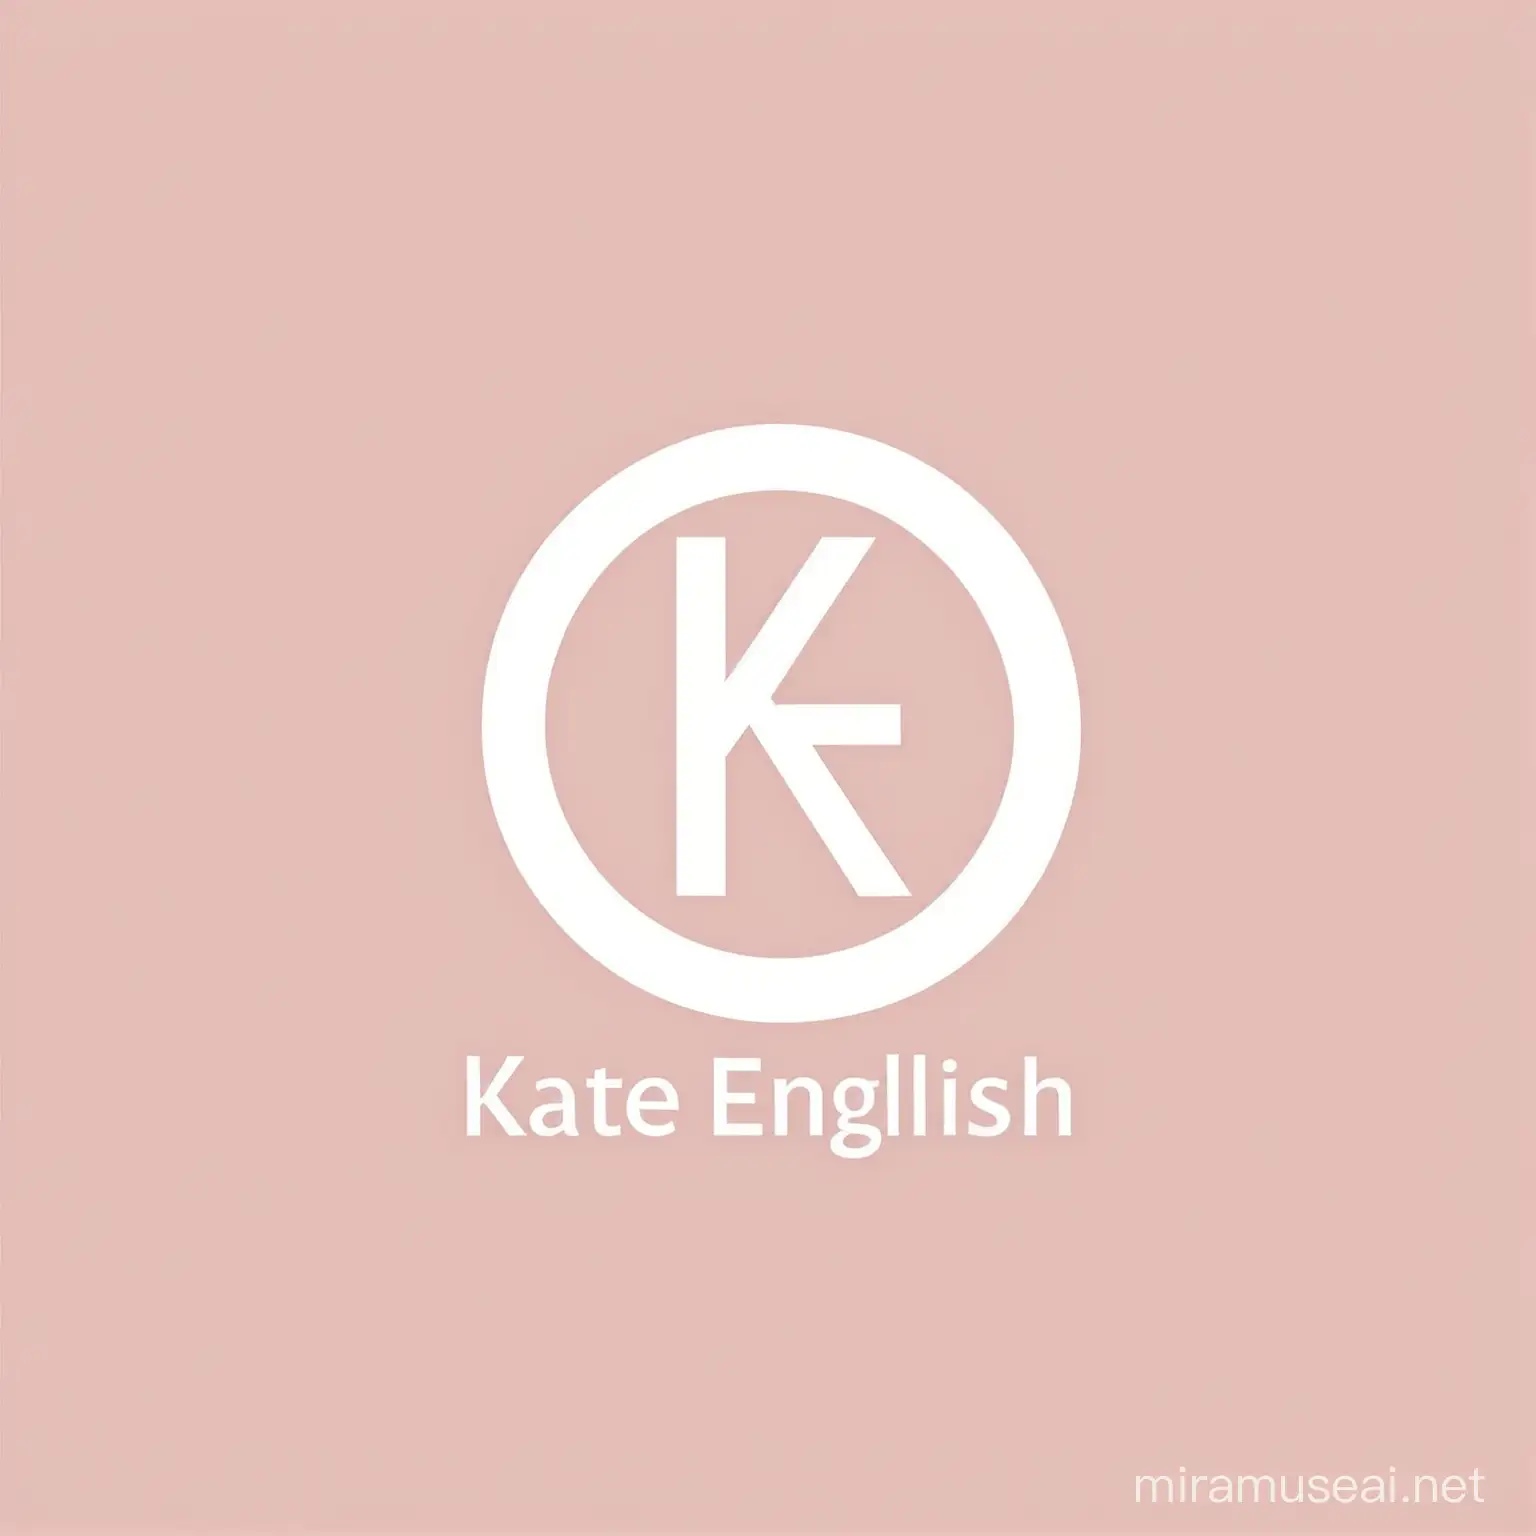 Modern English Course Logo Design featuring Kate English Initials in Minimalistic Style